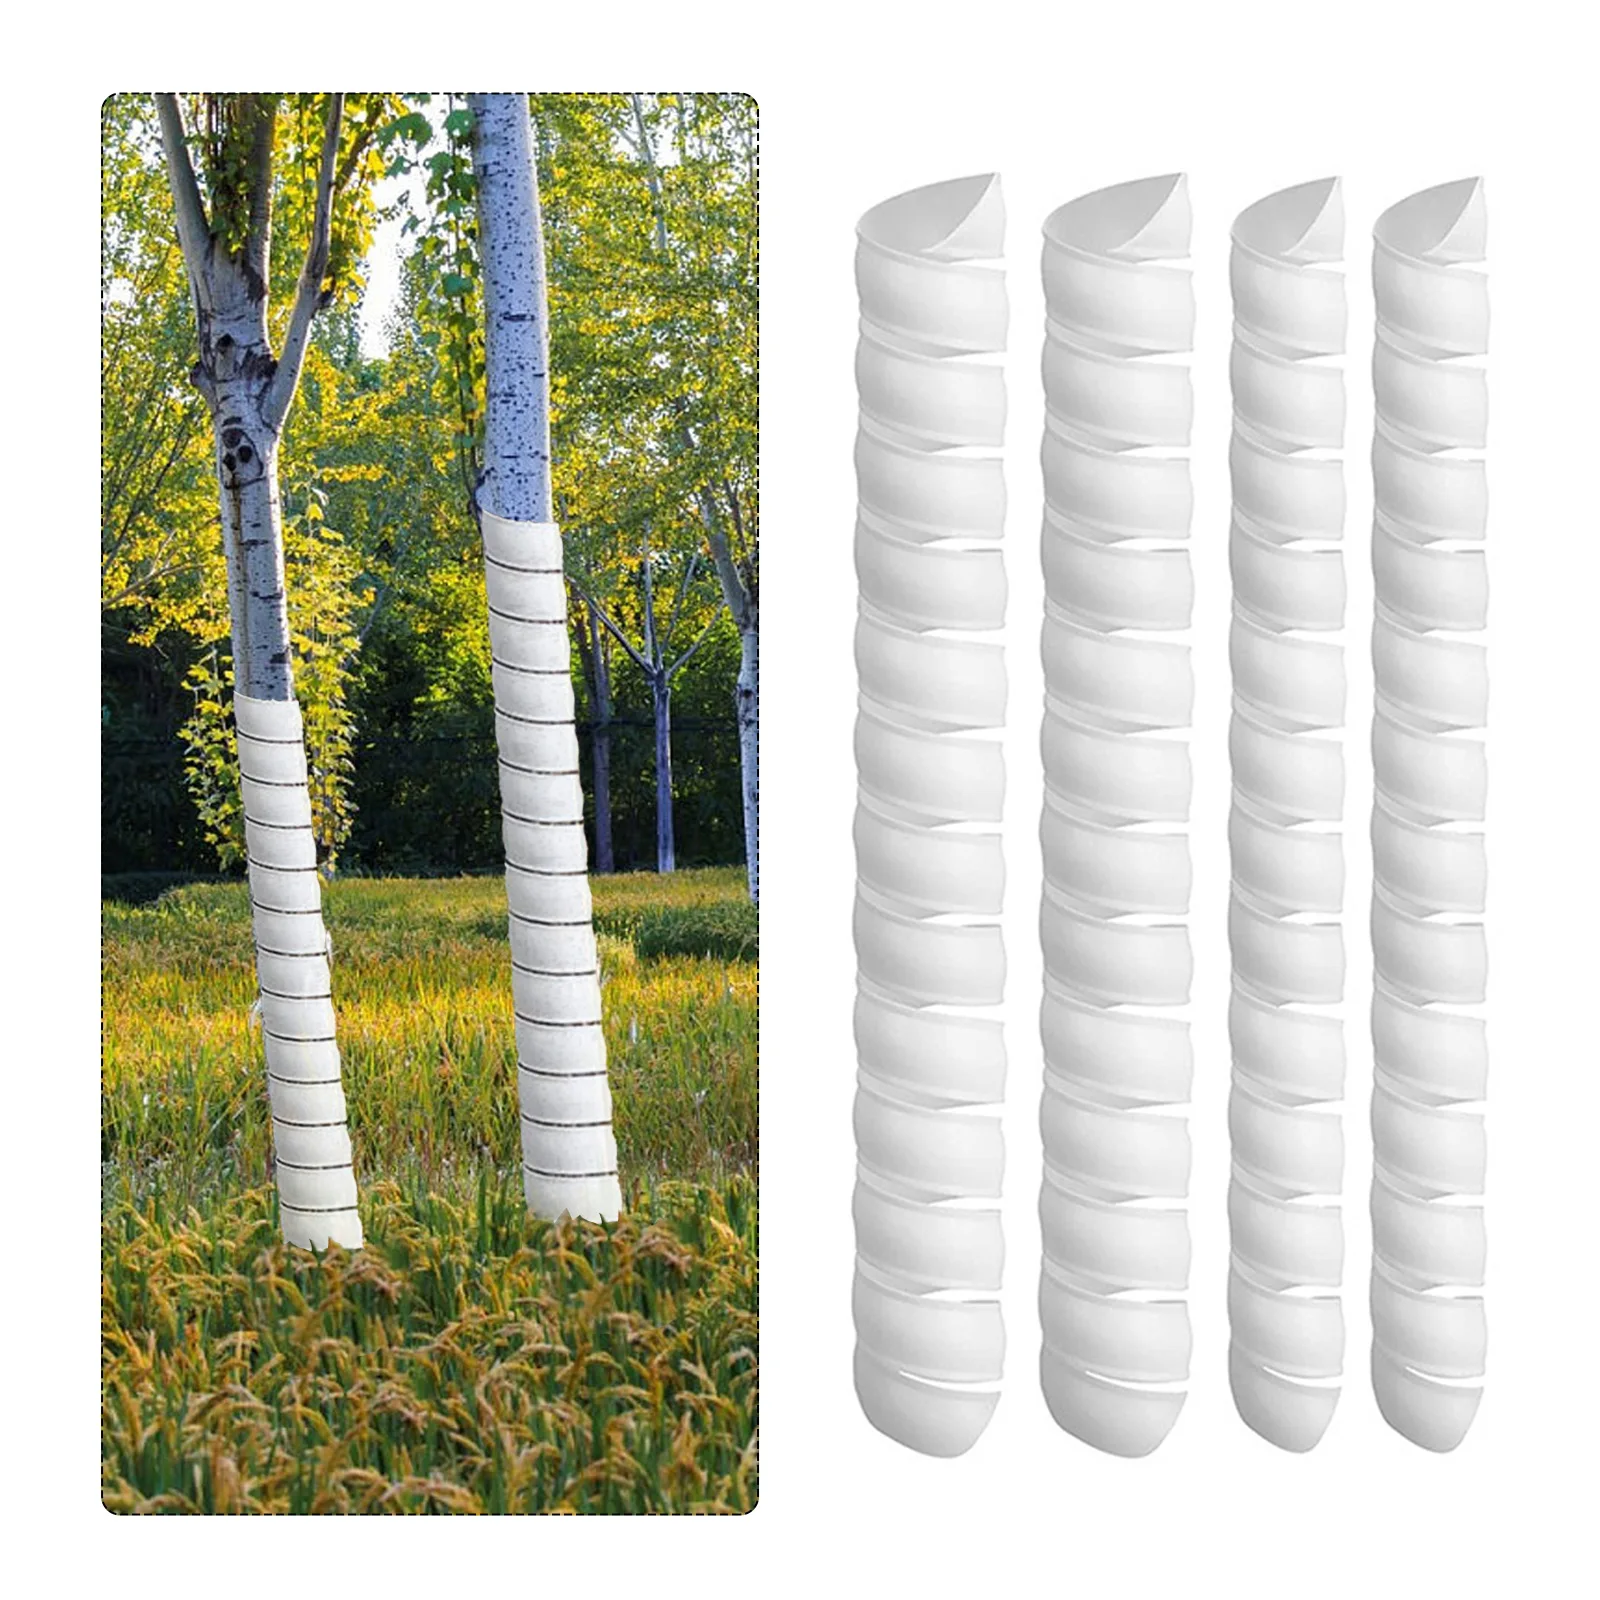 2pcs/4pcs Plant Tree Trunk Protector Weather Proof Plastic Guard Cover Plant Protection Tools Garden Accessories